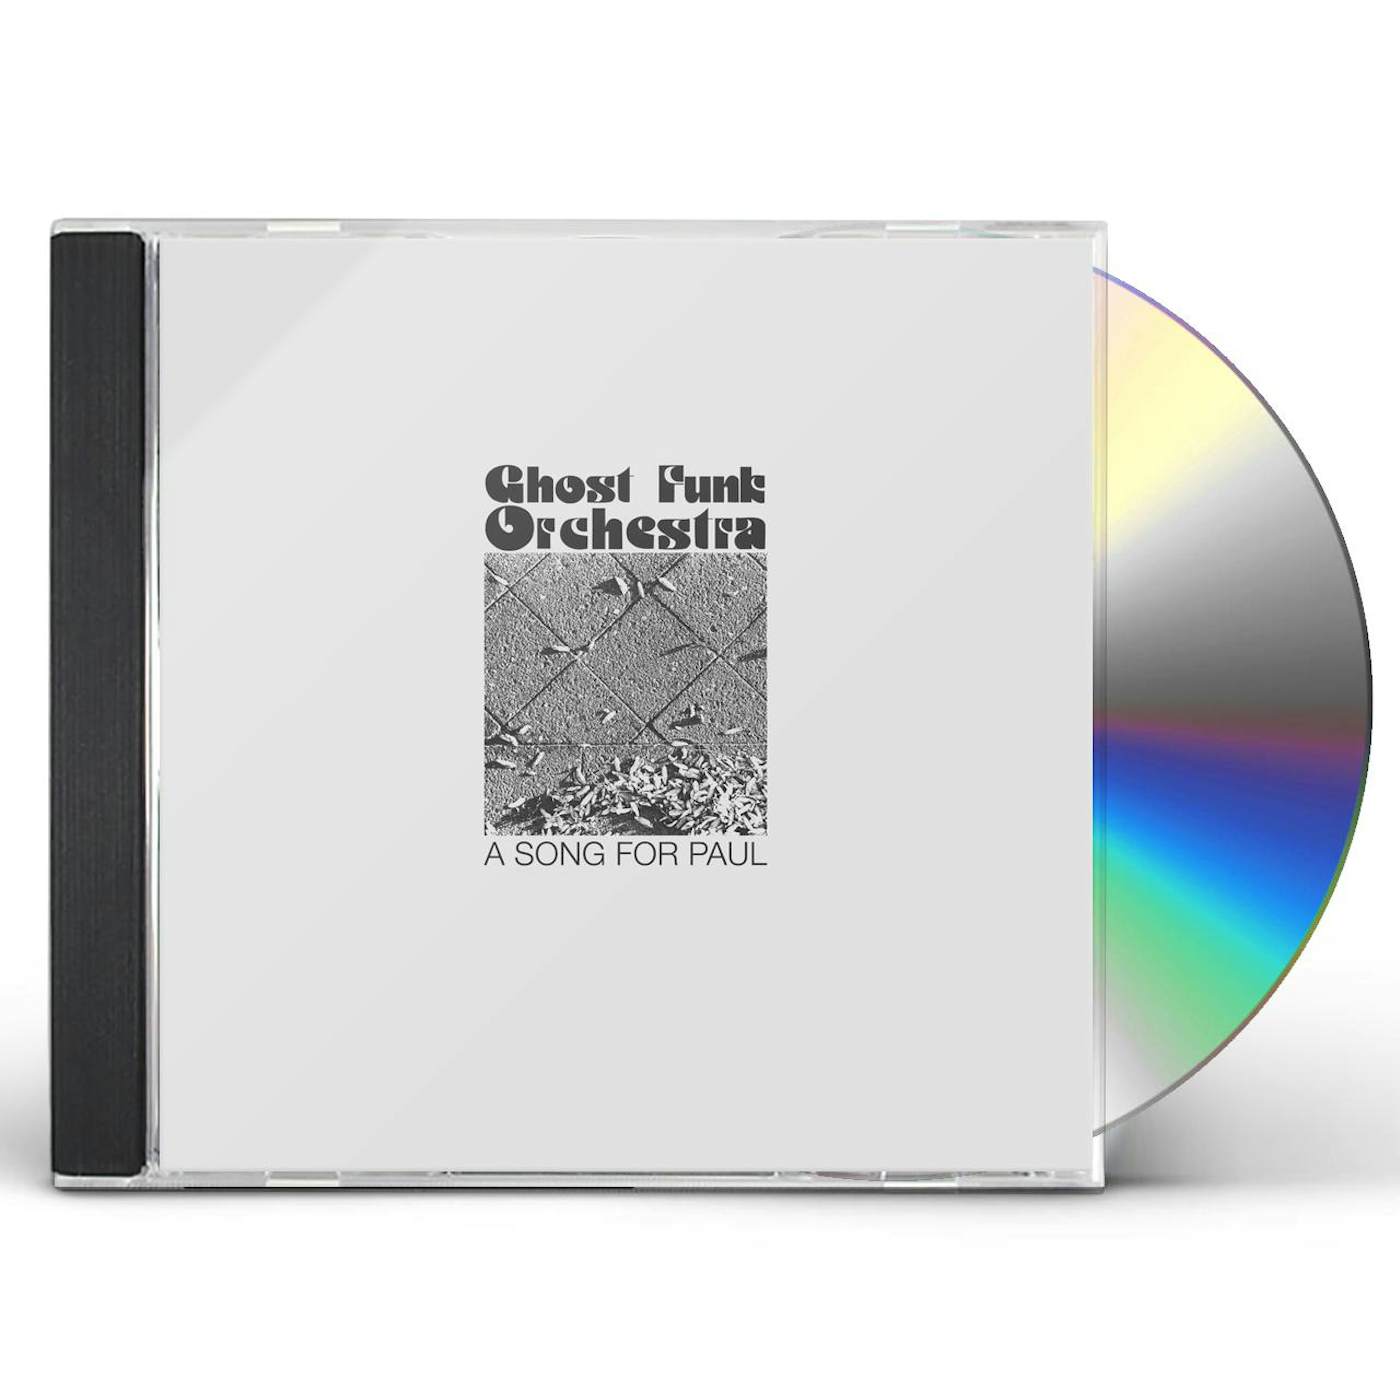 Ghost Funk Orchestra SONG FOR PAUL CD